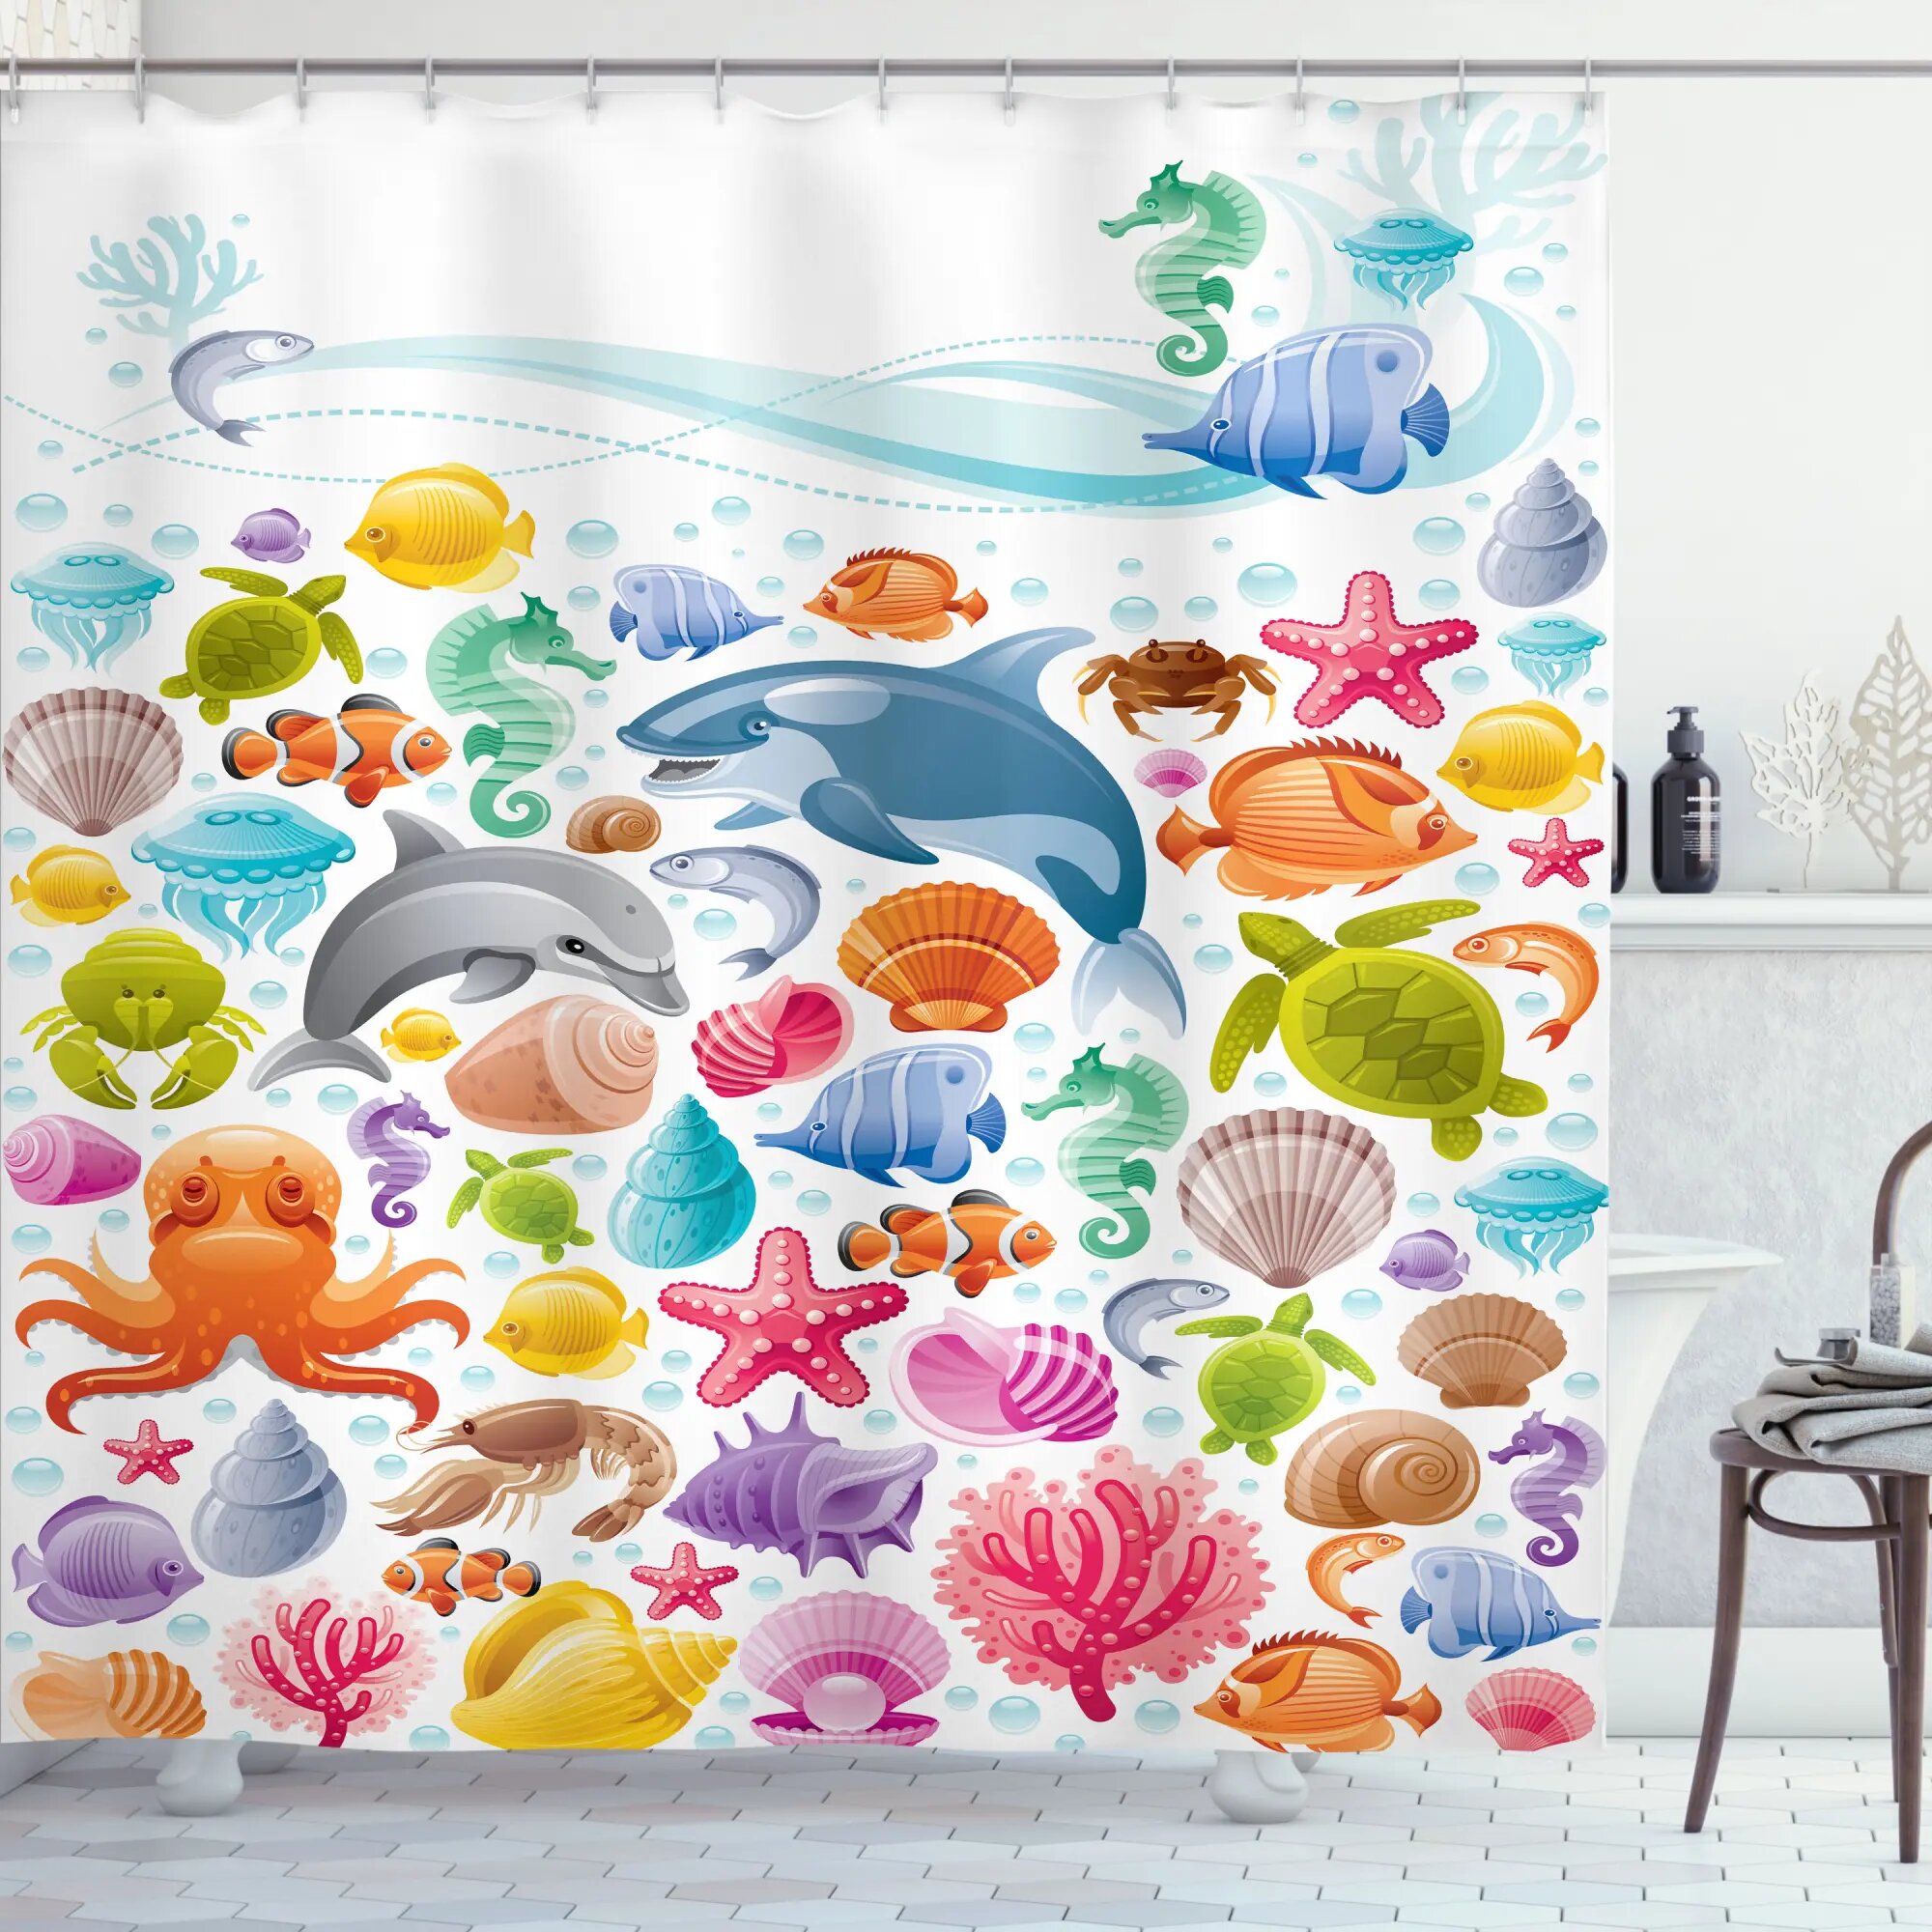 Undersea Tropical Fish Shower Curtain Liner Bathroom Set Polyester Fabric Hooks 